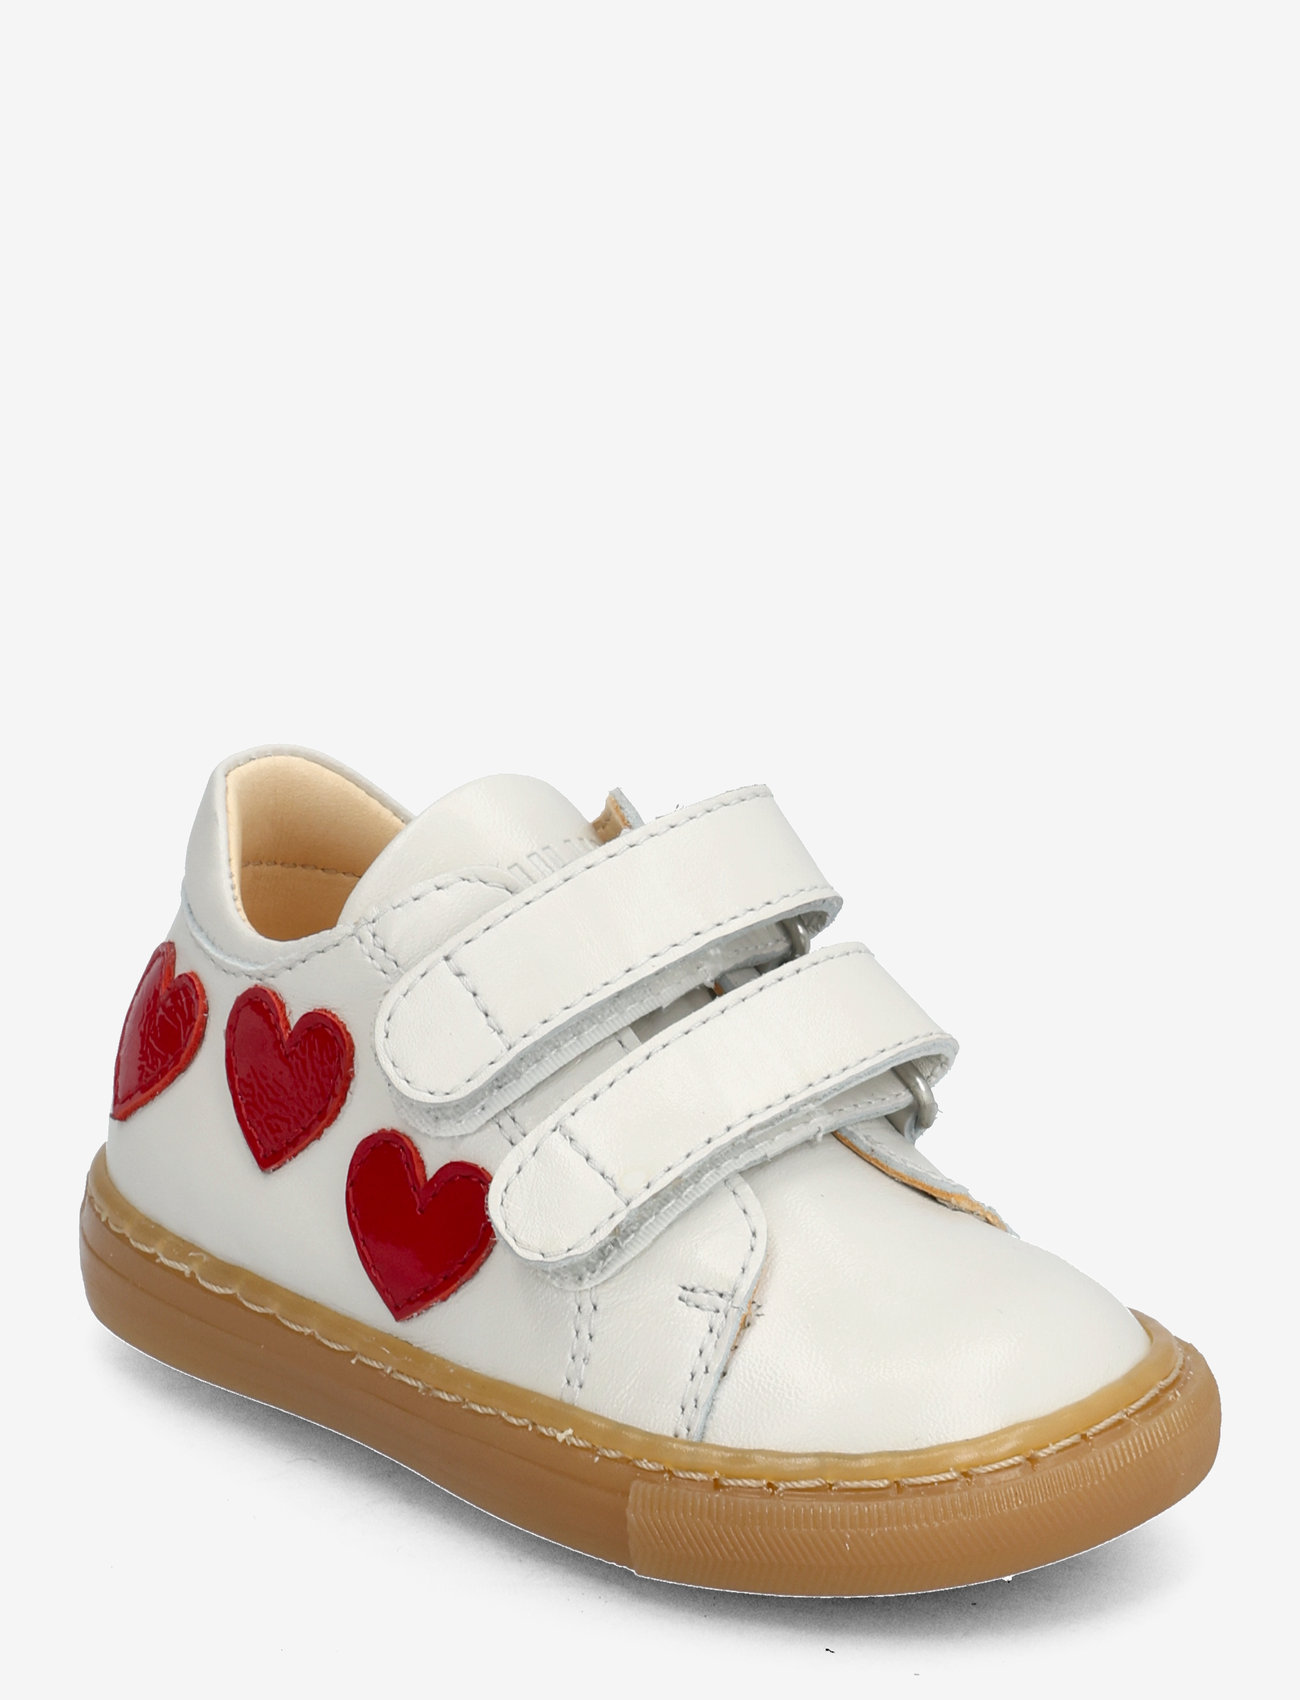 ANGULUS - Shoes - flat - with velcro - sommerschnäppchen - 1493/a003 off white/hearts - 0